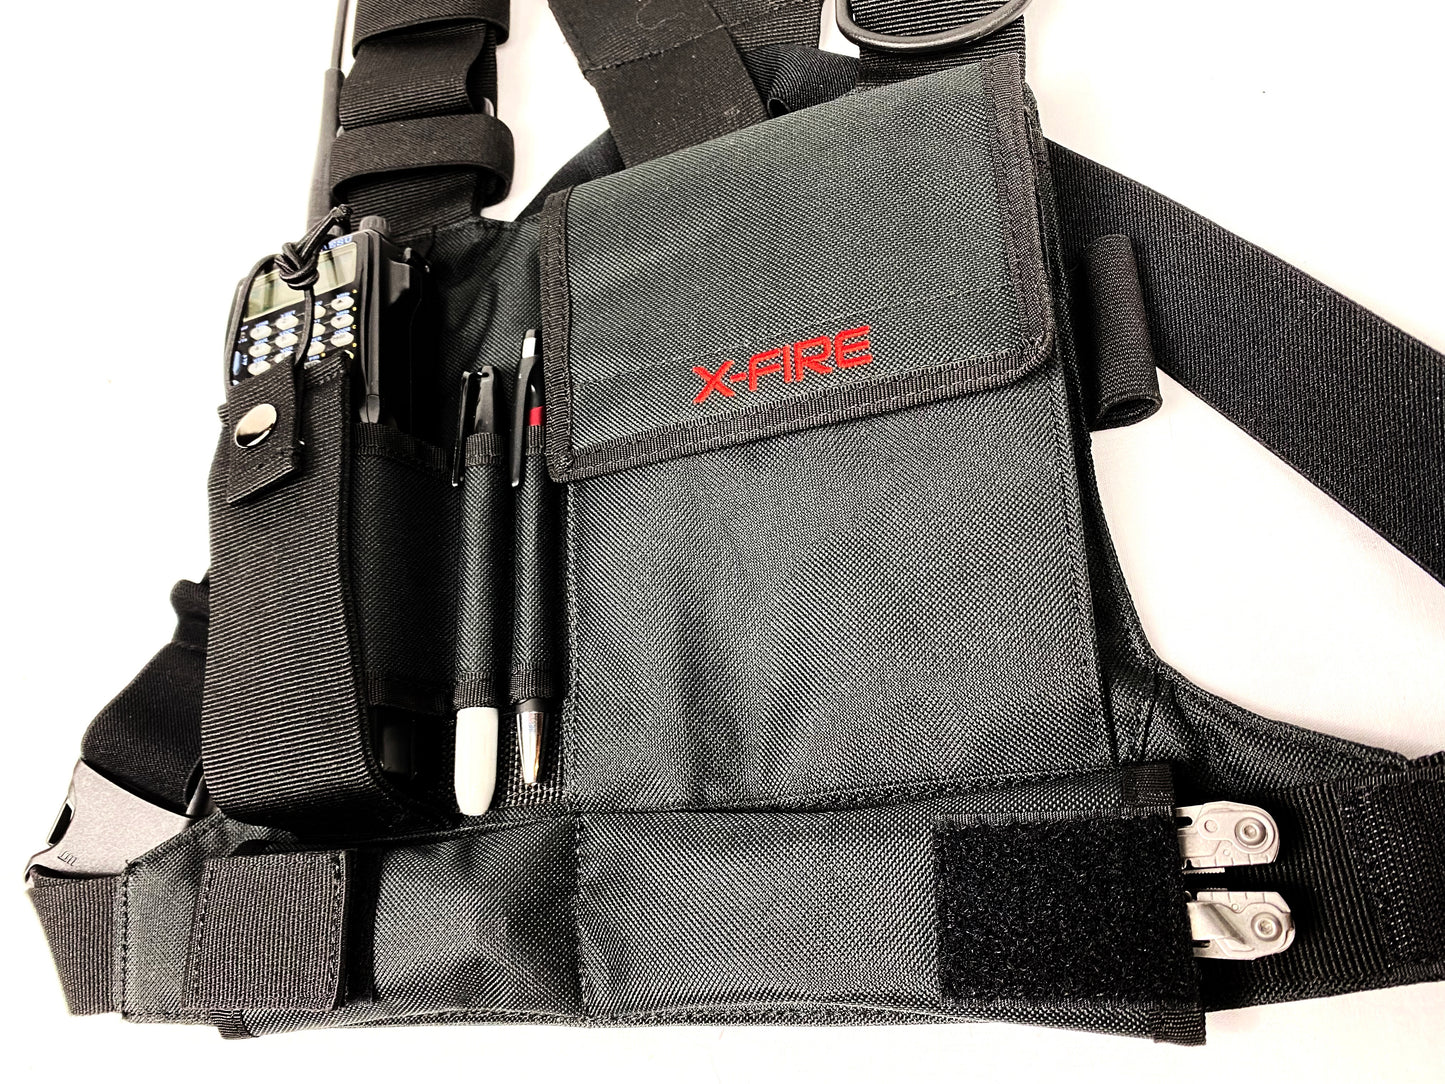 X-FIRE® Single Radio Chest Rig Harness w/Tool Pockets and 3m Reflective. Front Pouch Holder for Walkie Talkie Portable Radio/GPS